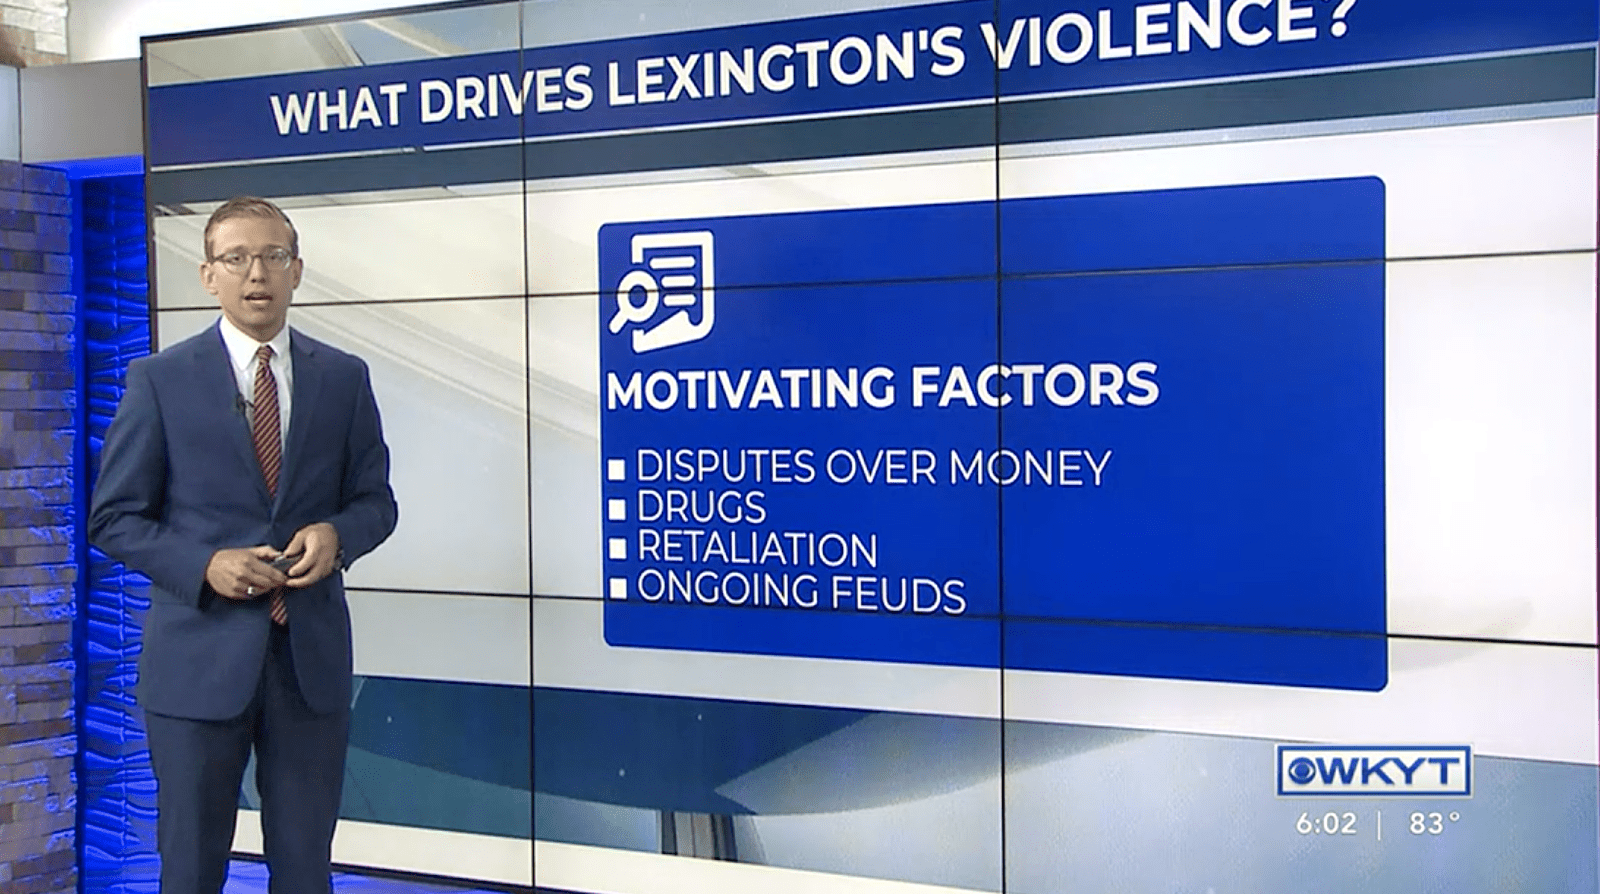 Report obtained by WKYT presents findings of 2019 Lexington gun violence analysis